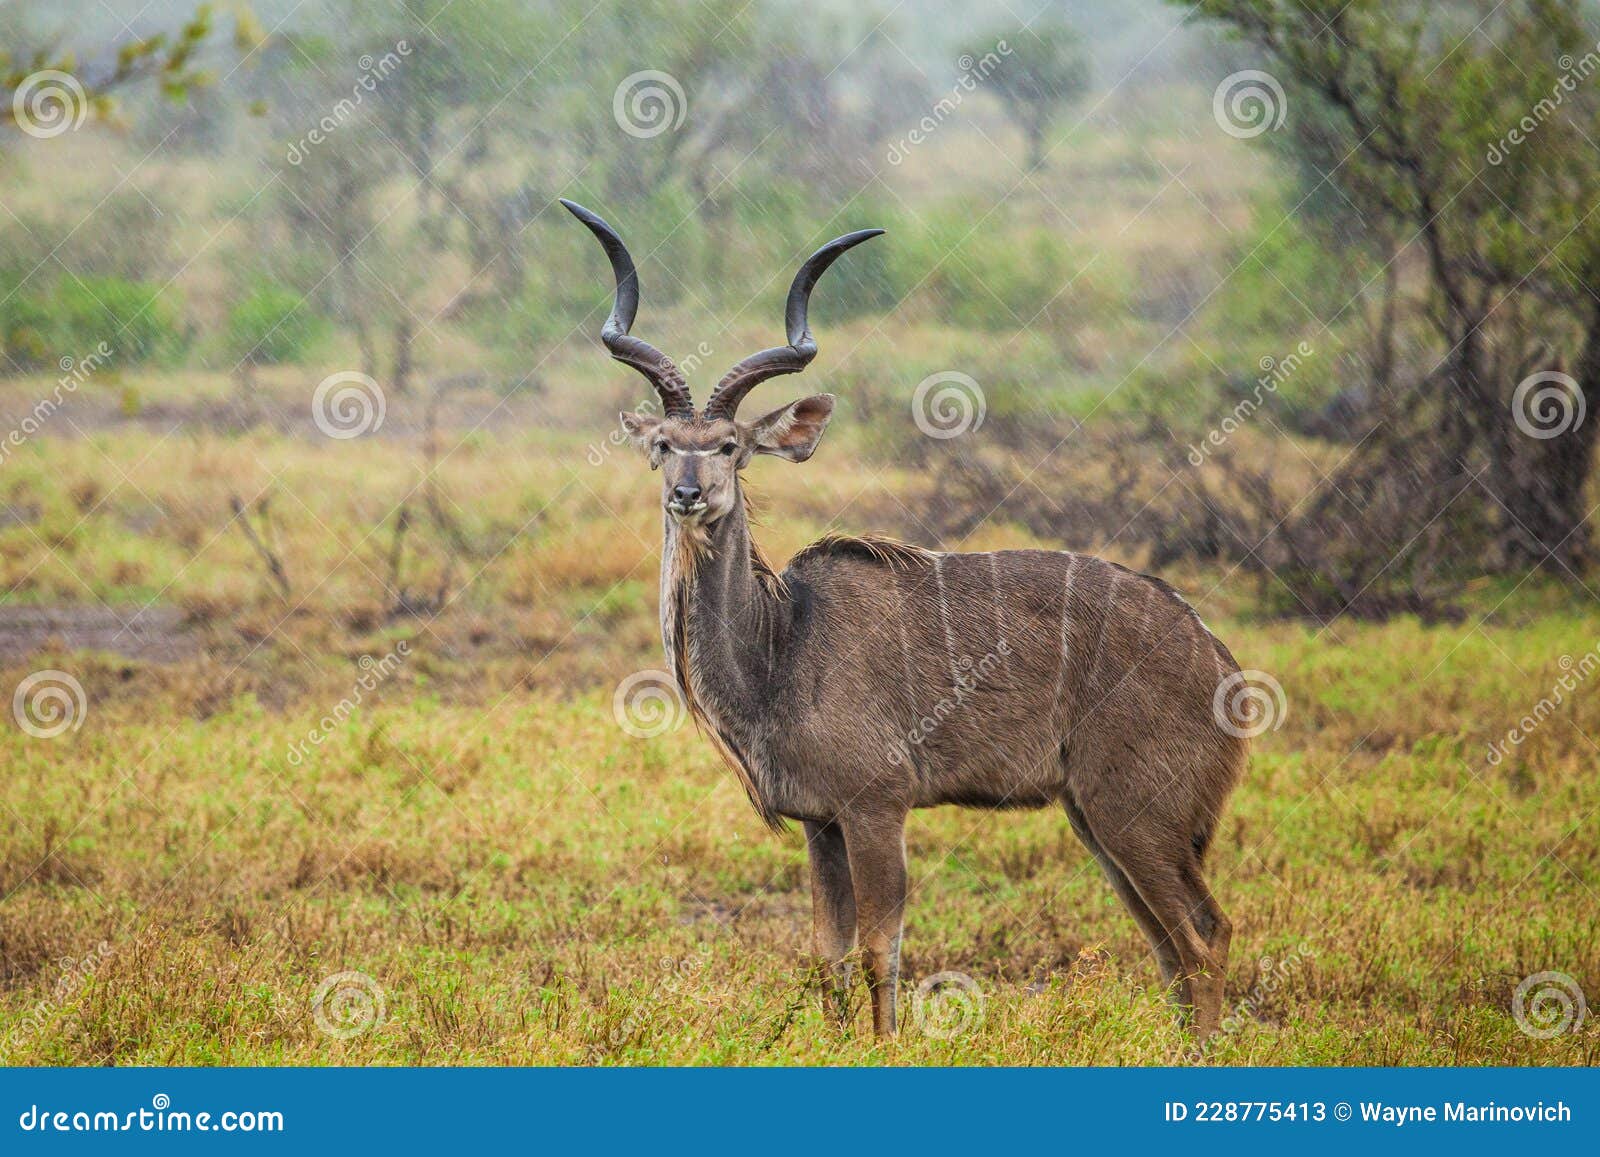 greater kudu standing in a thundershower in the kruger park